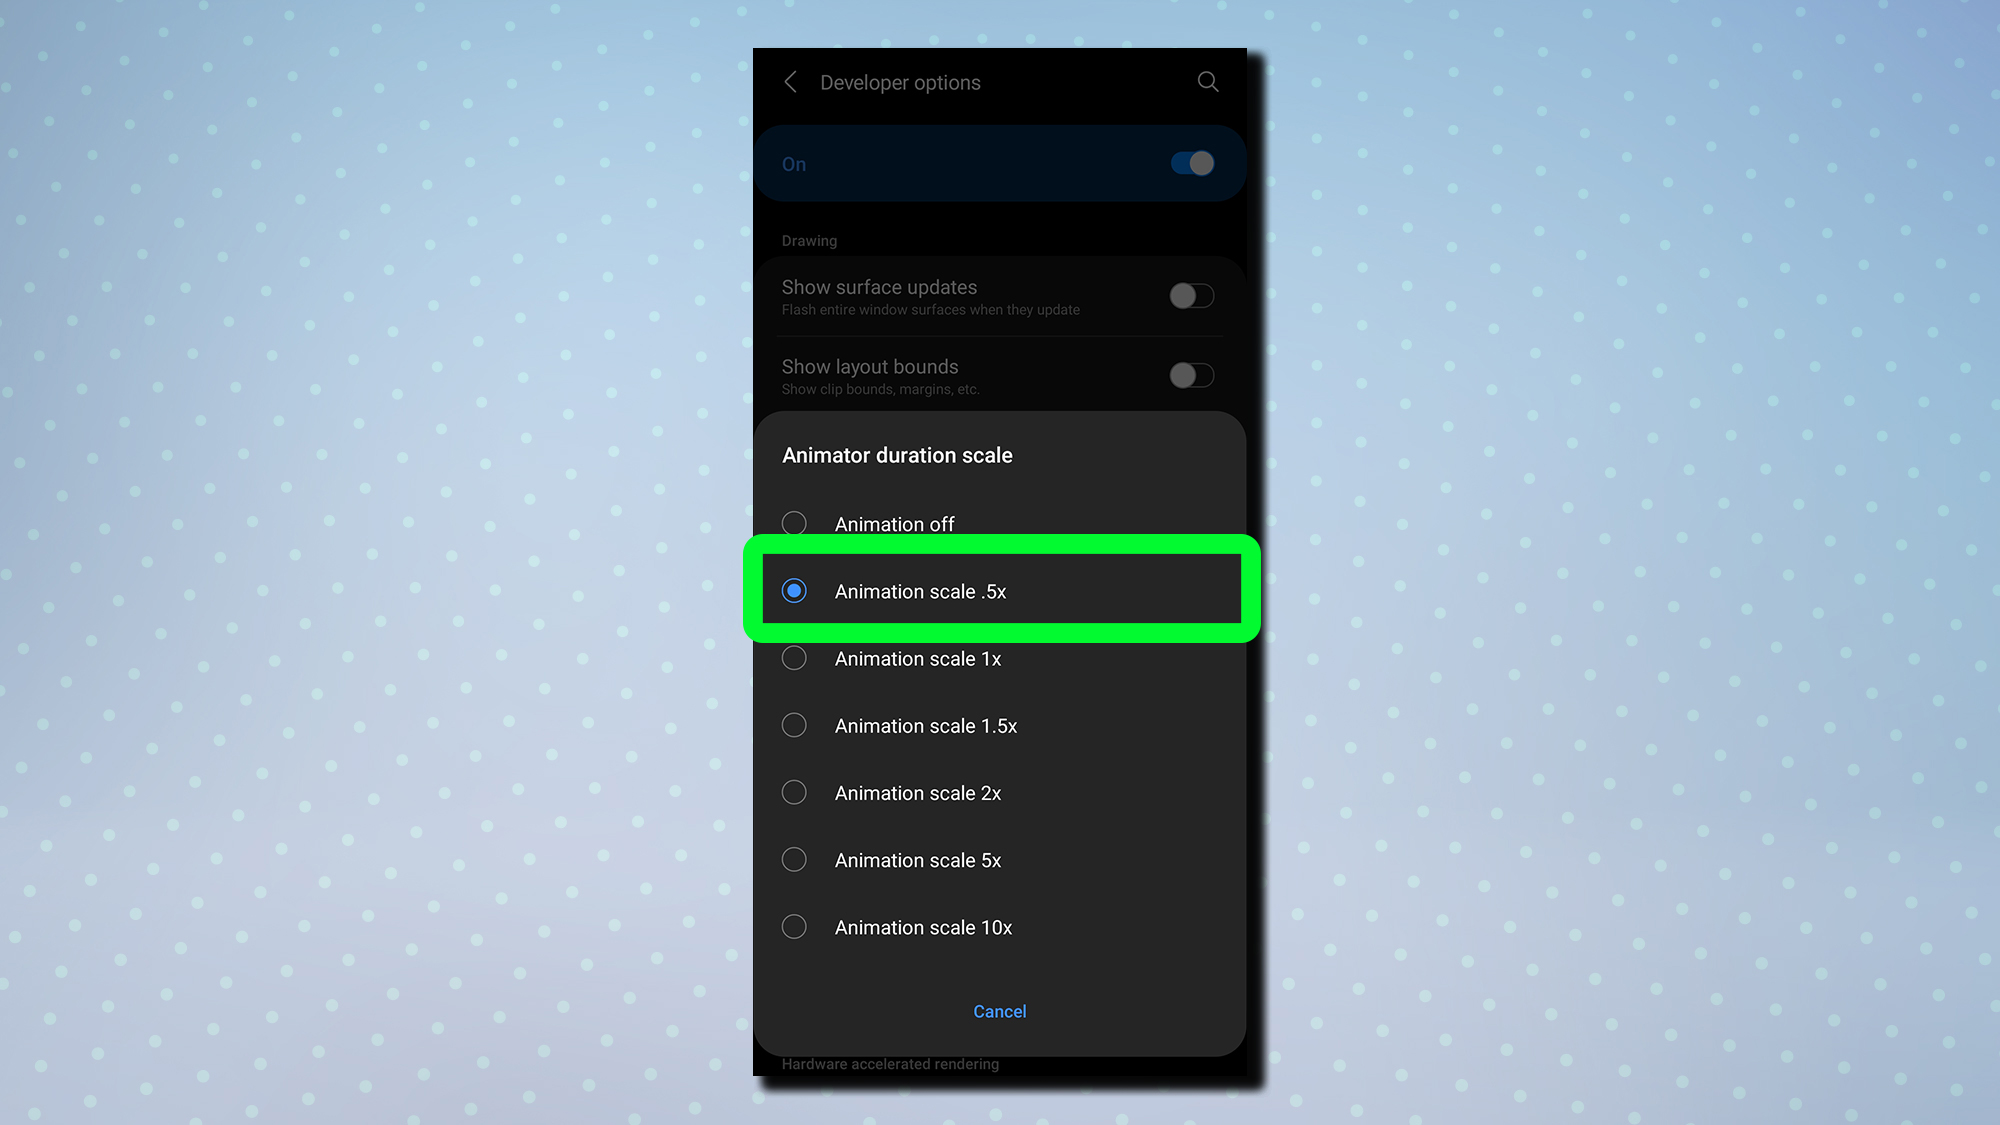 A screenshot showing the Android developer options menu with animator duration scale highlighted